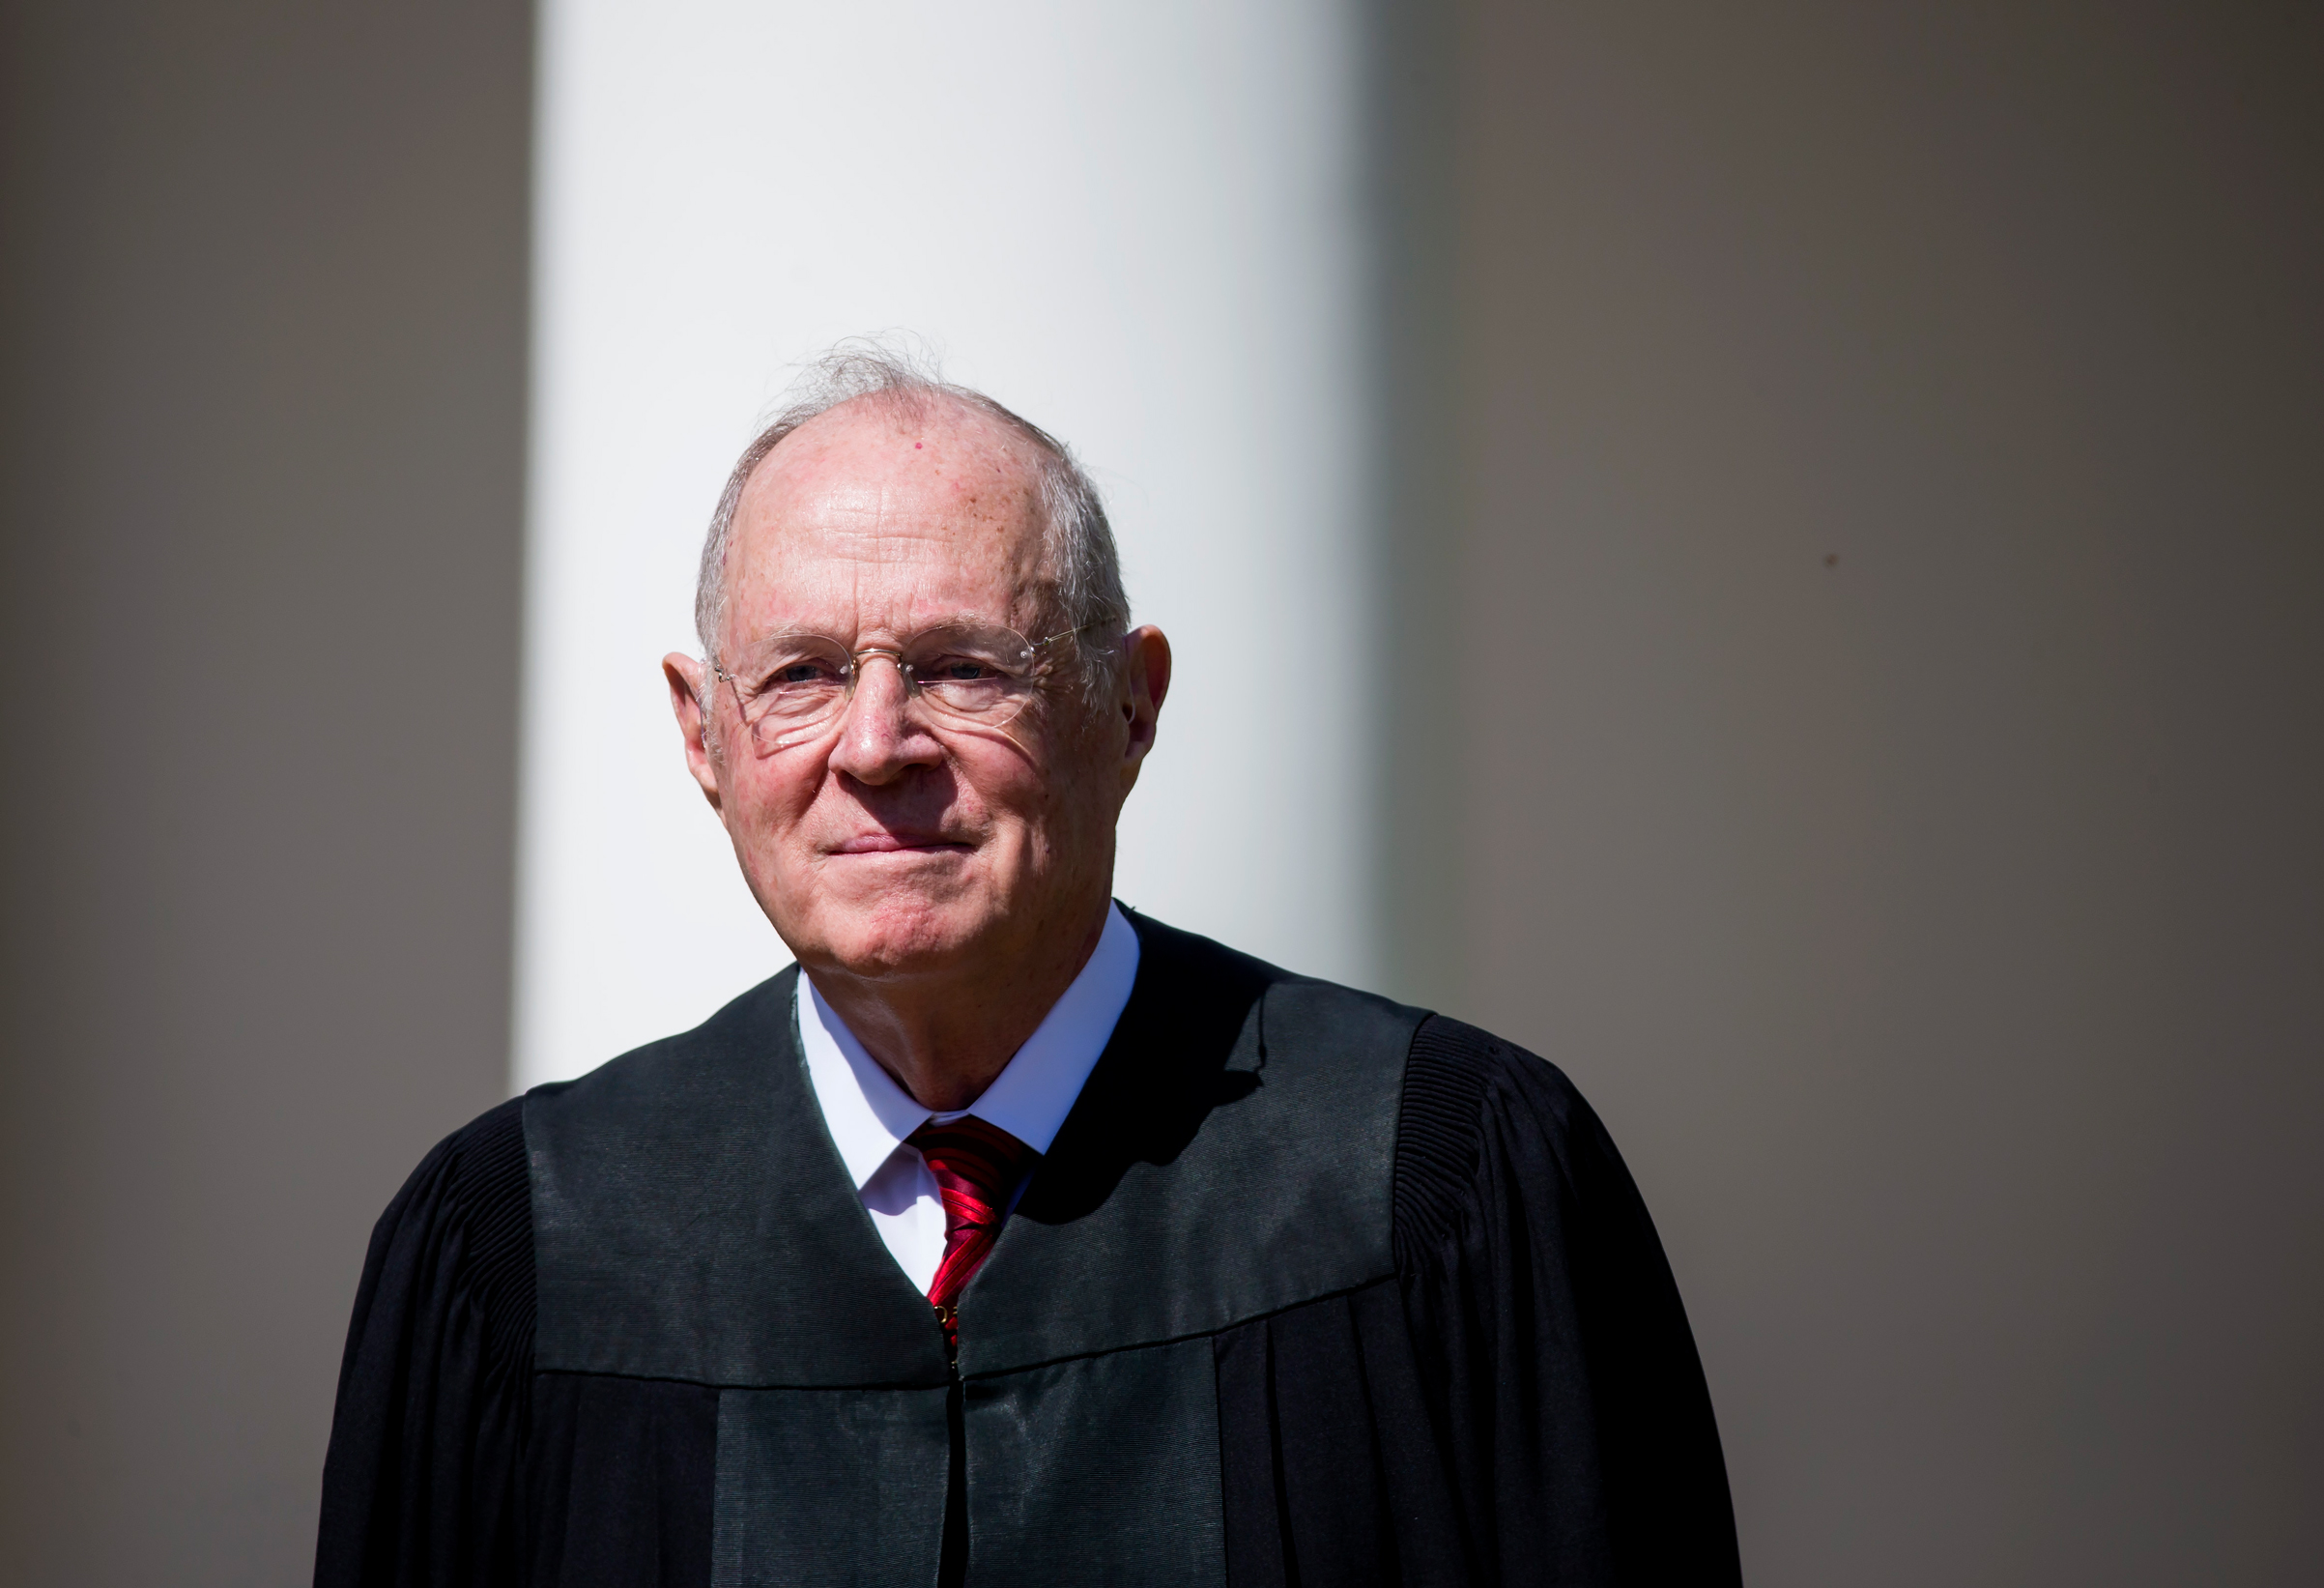 U.S. Supreme Court Associate Justice Anthony Kennedy is seen during a ceremony in the Rose Garden at the White House April 10, 2017 in Washington, D.C. (Eric Thayer/Getty Images)